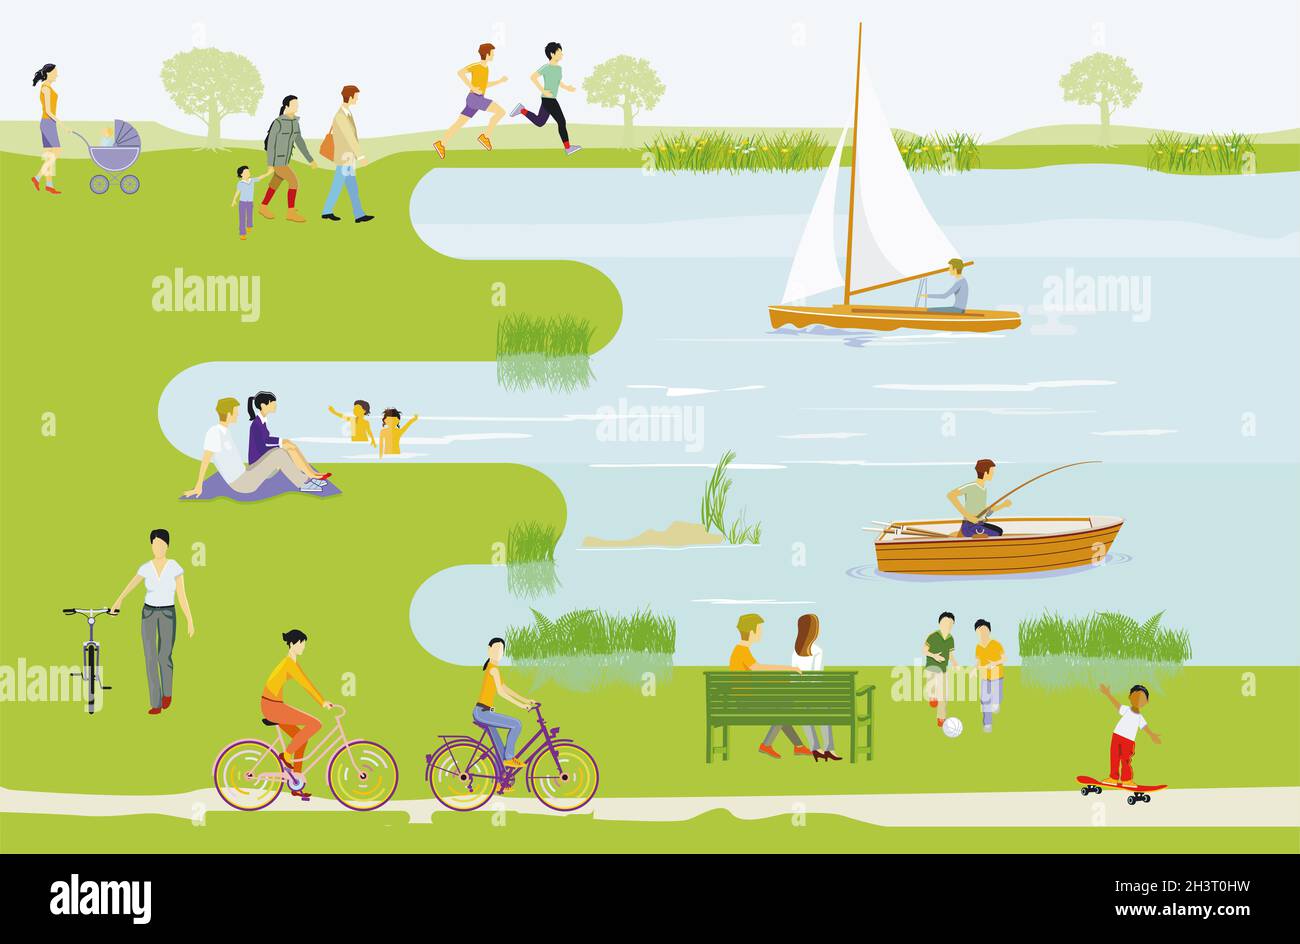 Leisure and recreation at the lake illustration Stock Photo